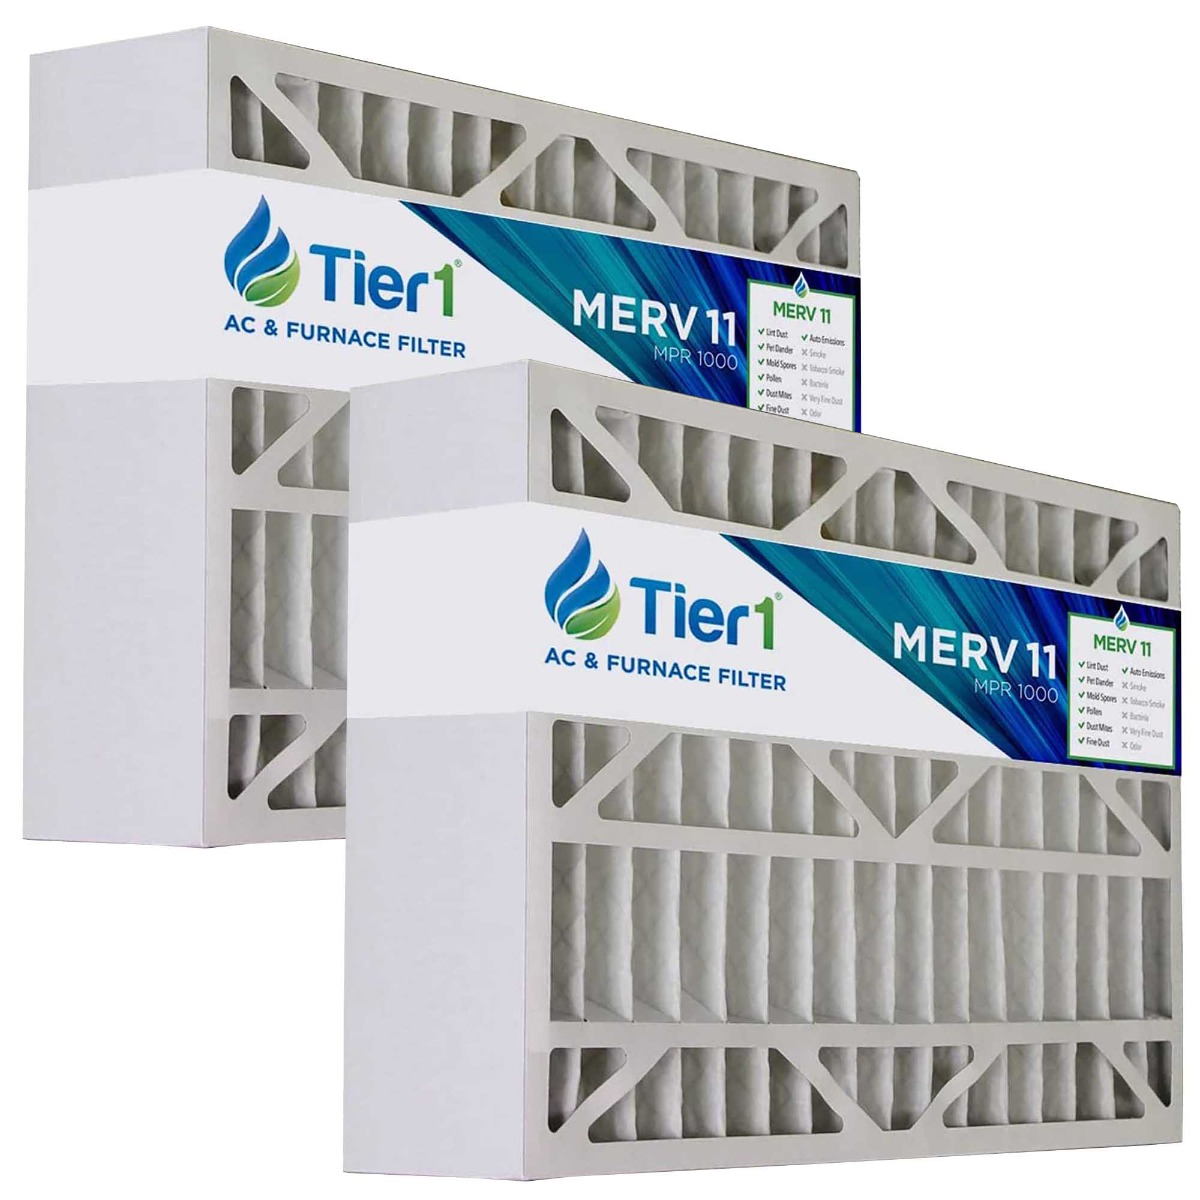 Filterbuy 16x25x5 Air Filter MERV 11 Allergen Defense (1-Pack), Pleated  HVAC AC Furnace Air Filters Replacement for Honeywell FC100A1029, Lennox  X6670